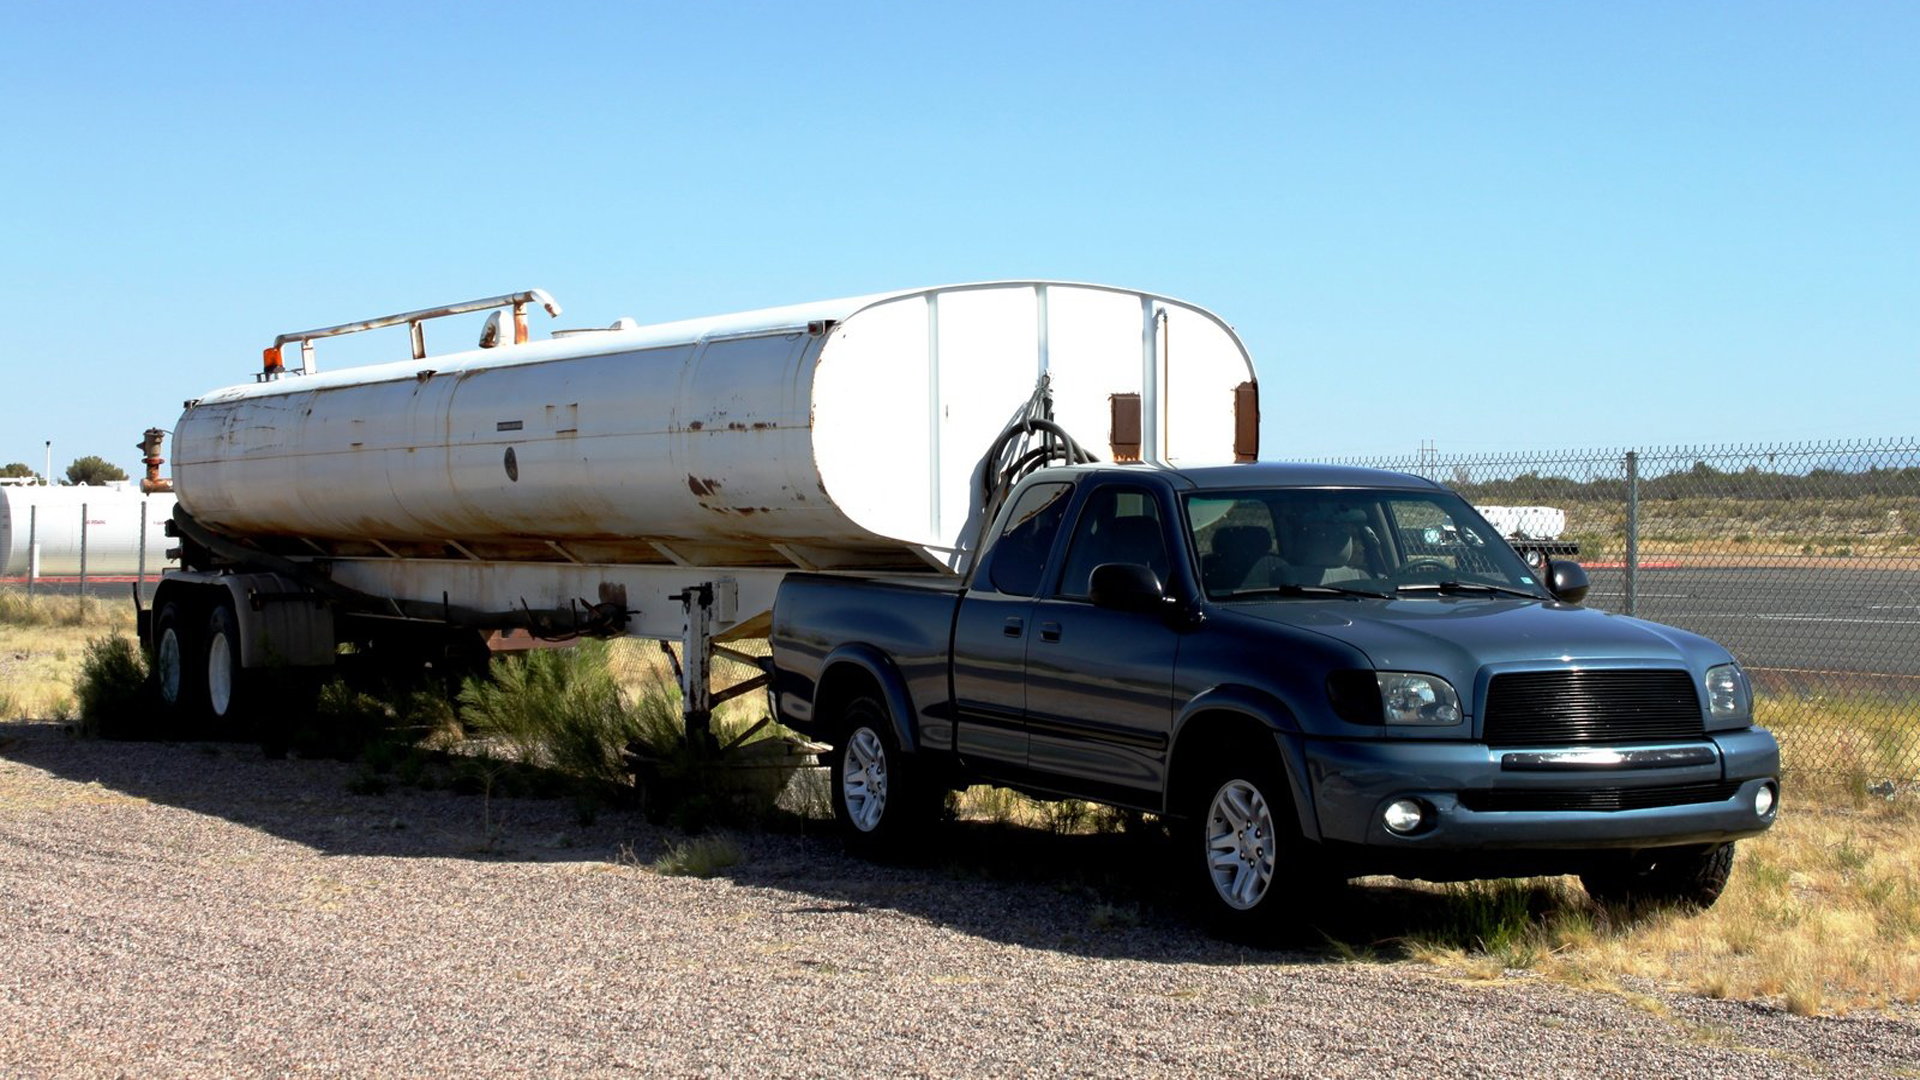 Toyota Tacoma: Modifications to Increase Towing Capacity | Yotatech